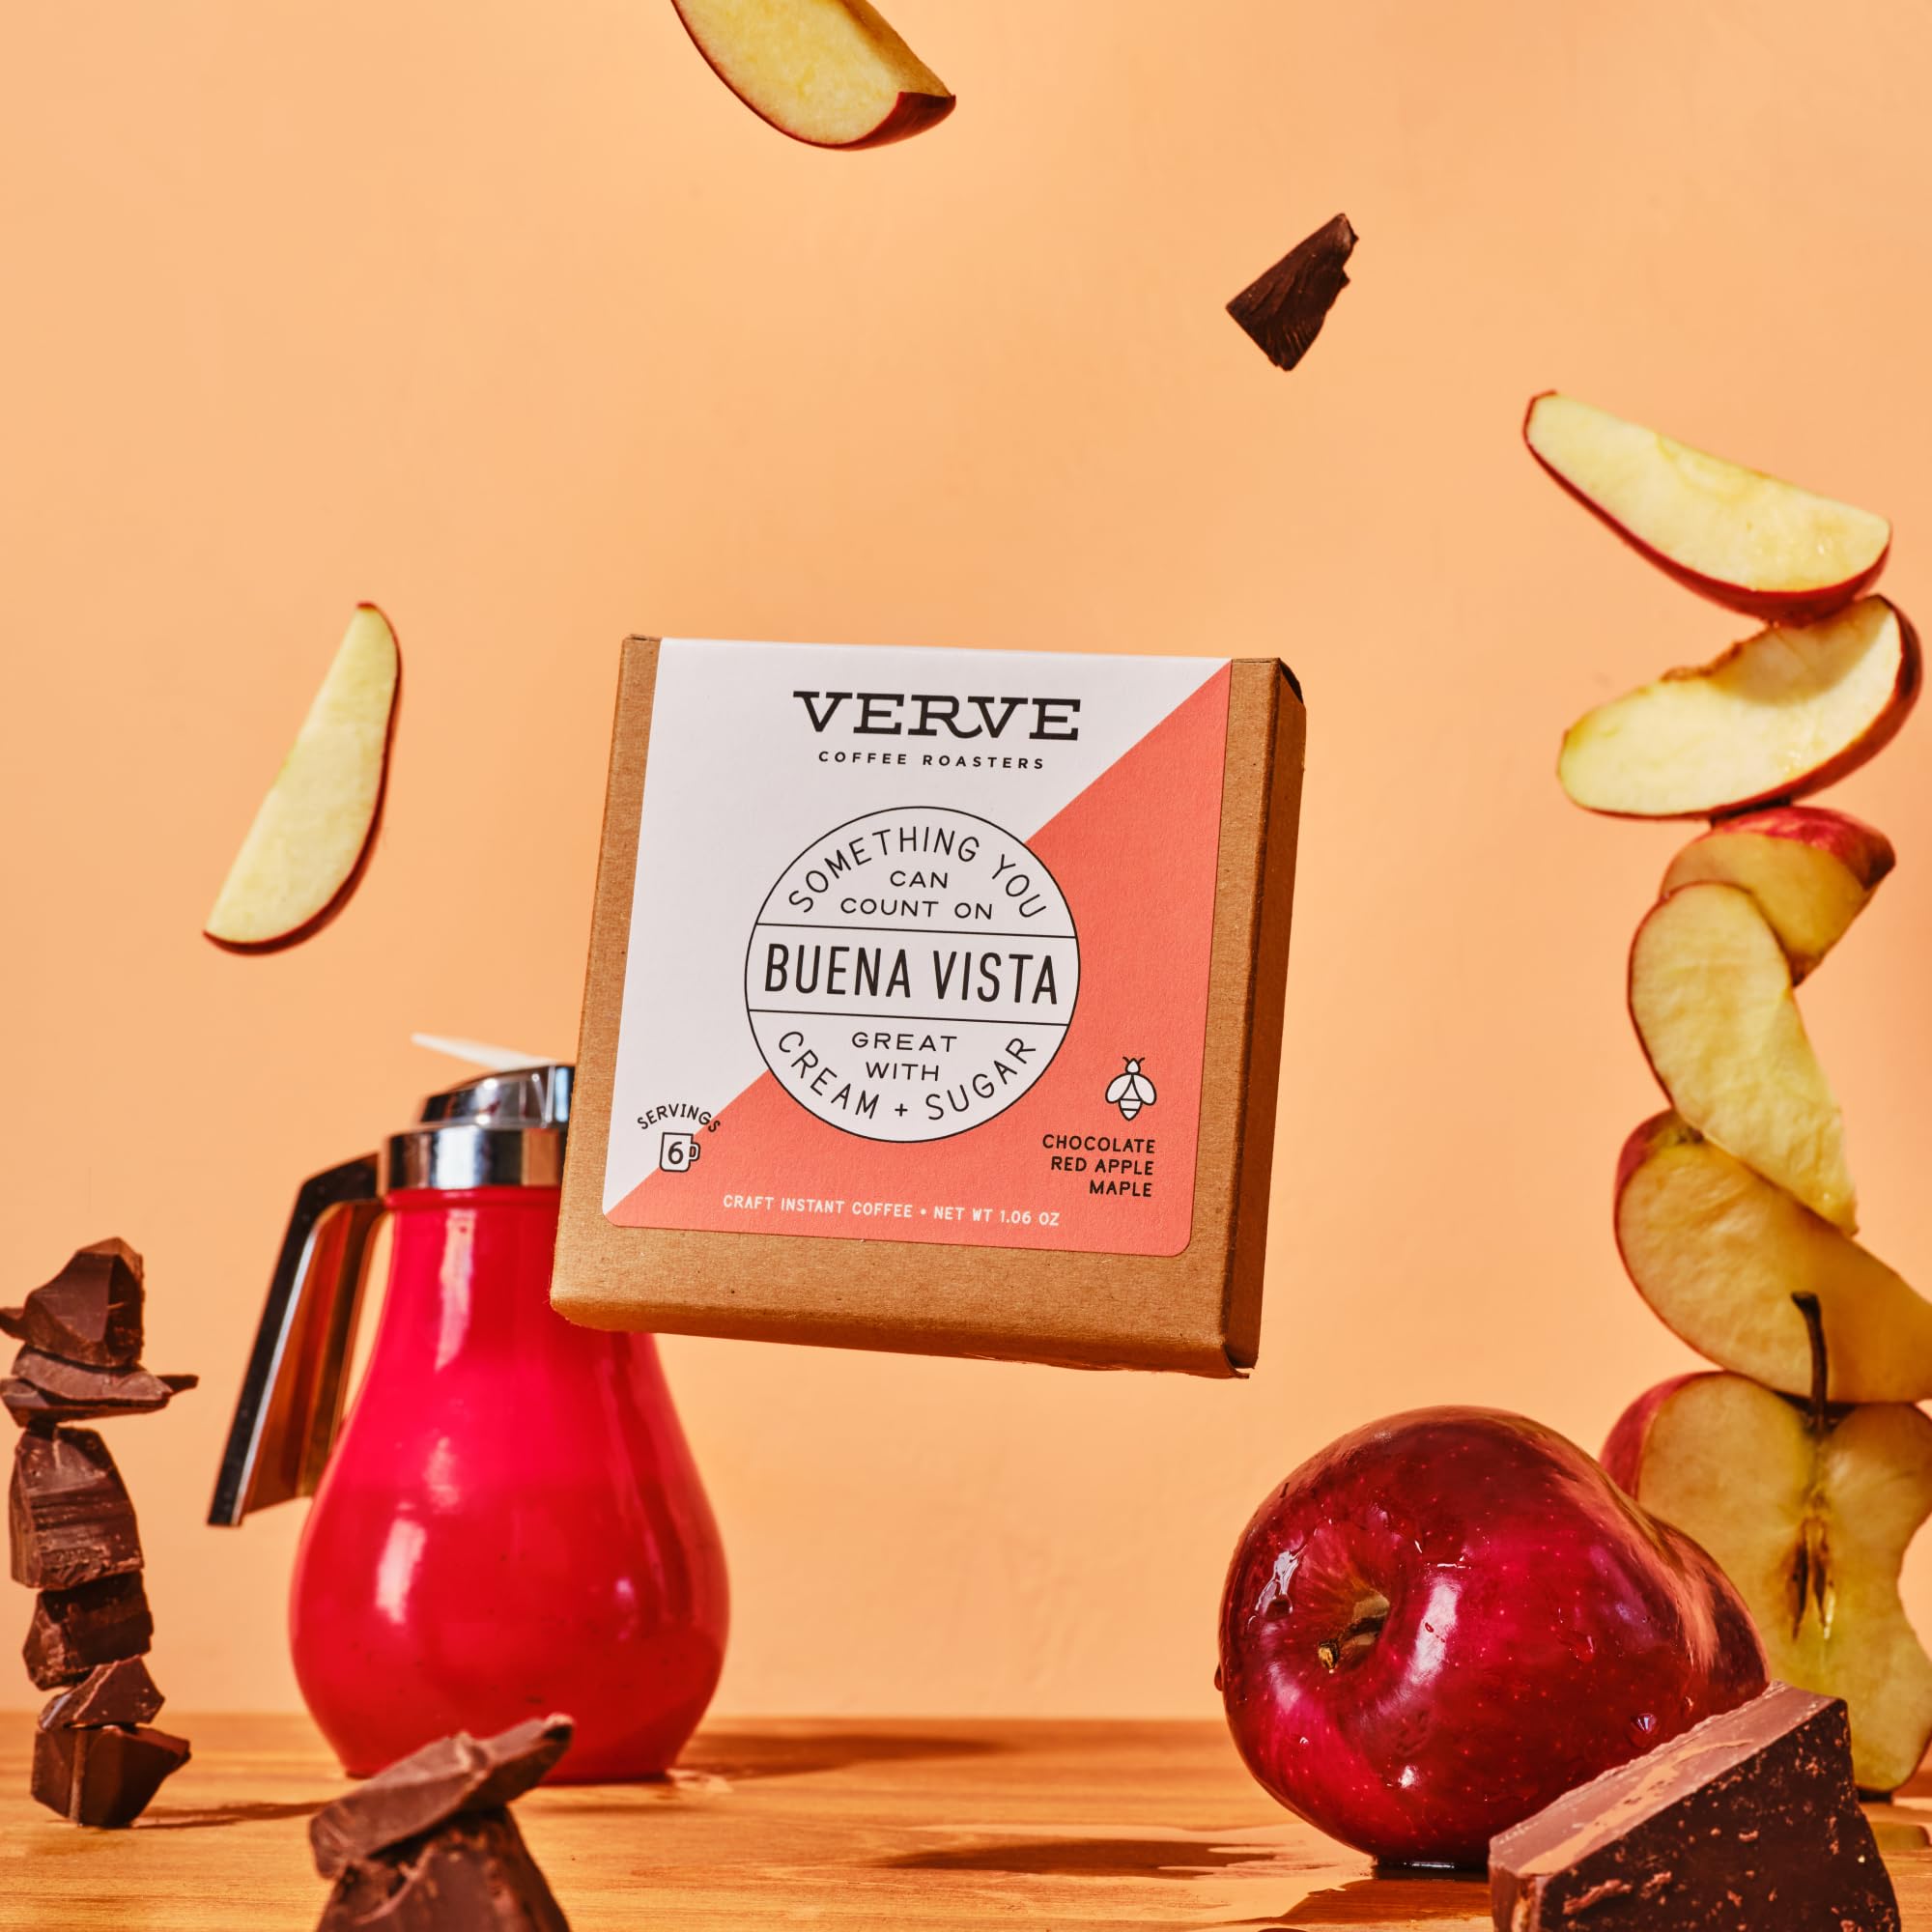 Verve Coffee Roasters Craft Instant Coffee Buena Vista Blend | Dark Roast, Ground, Hand-Roasted | Colombian Blend | Enjoy Hot or Cold | Up to 6 Servings